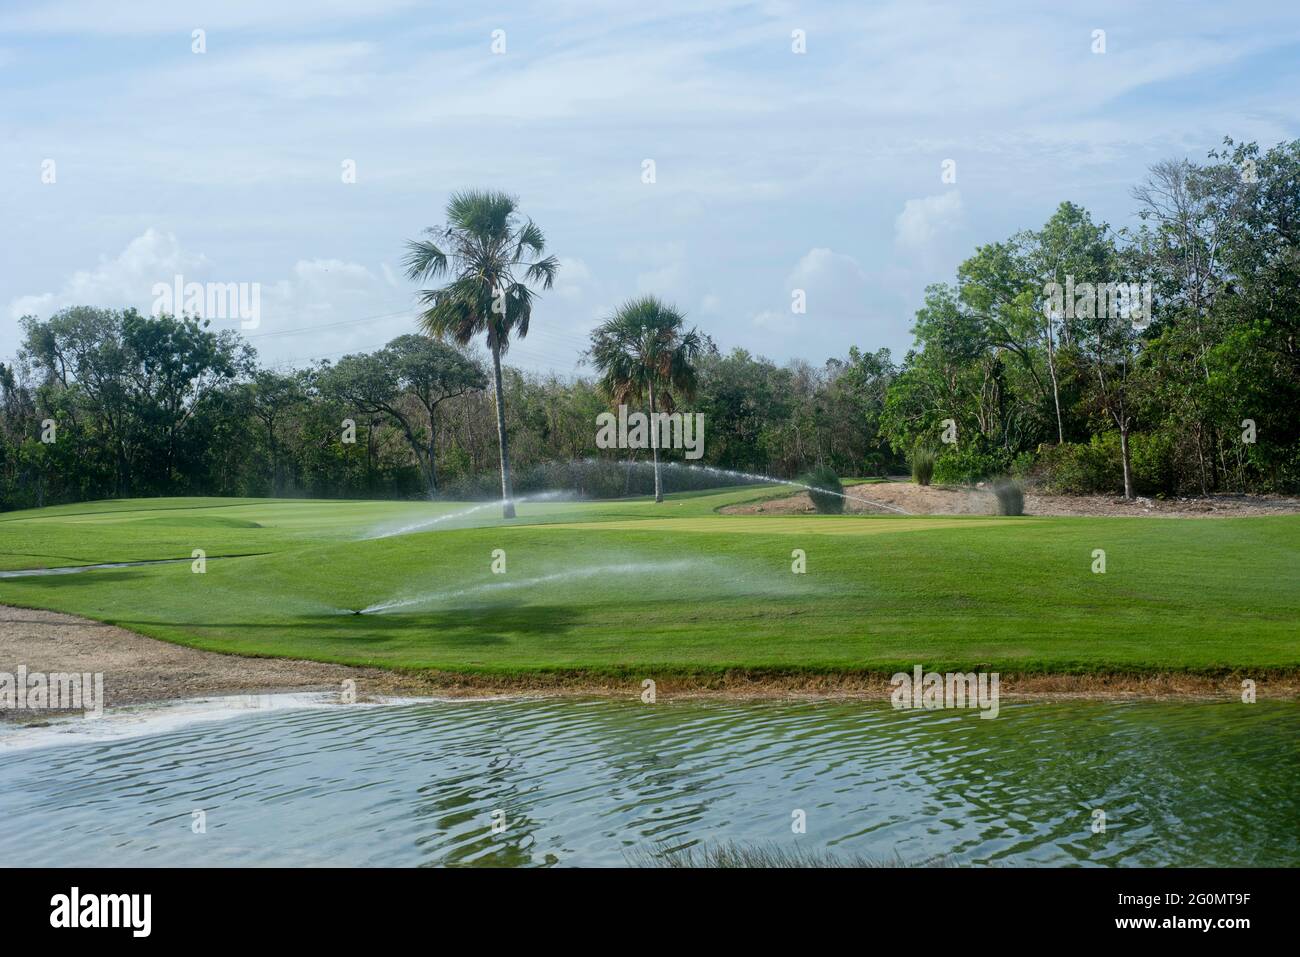 A long distance irrigated golf course water sprinkler system. In the background an artificial lake and tropical vegetation in Mexico Stock Photo